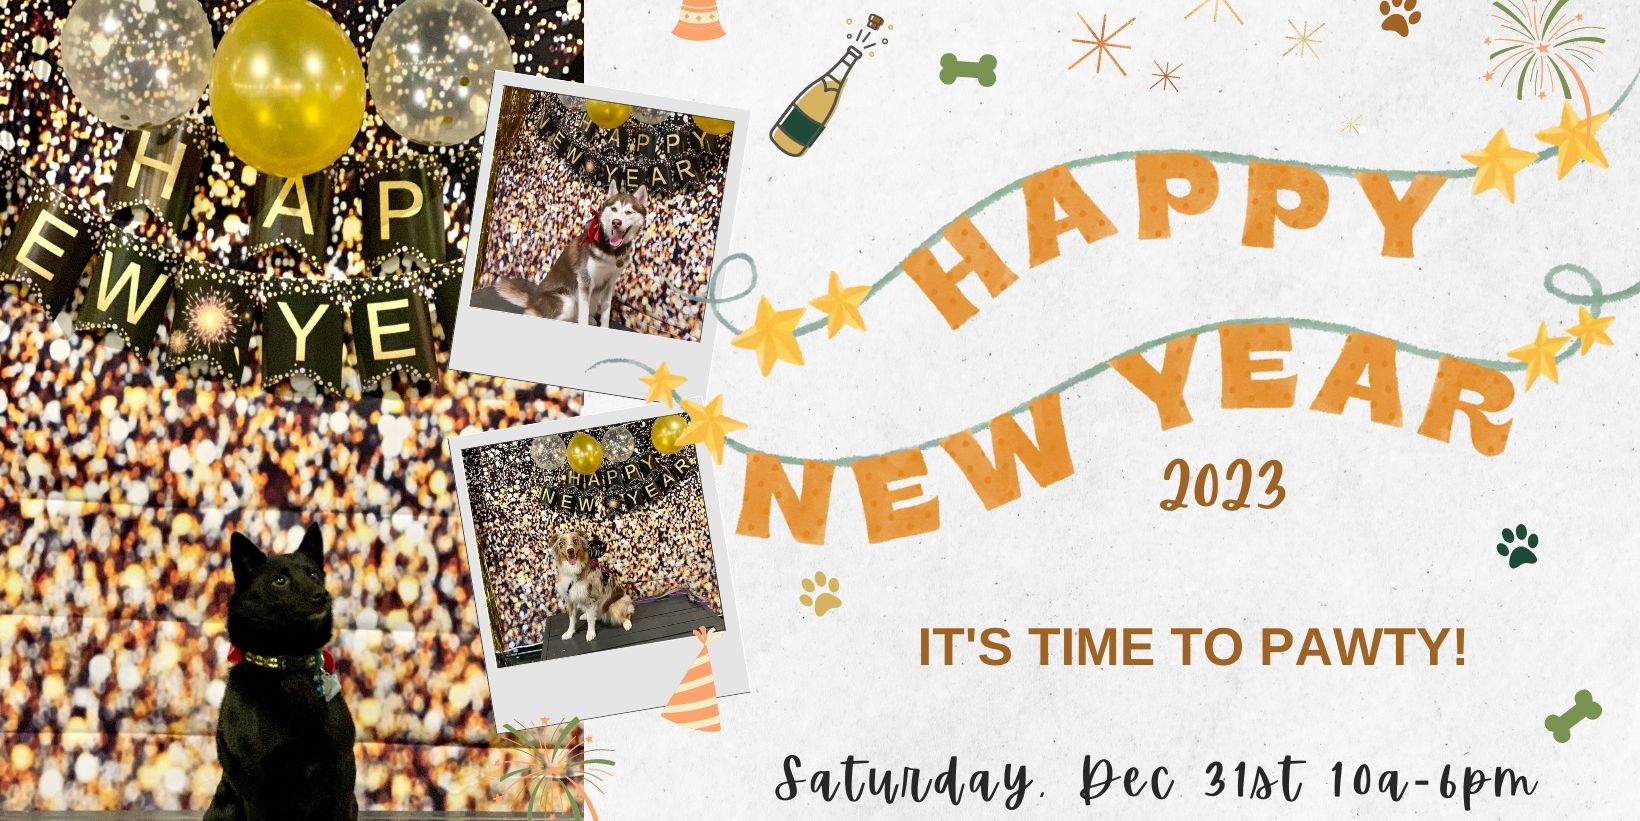 Bark in the New Year at Omaha Dog Bar promotional image